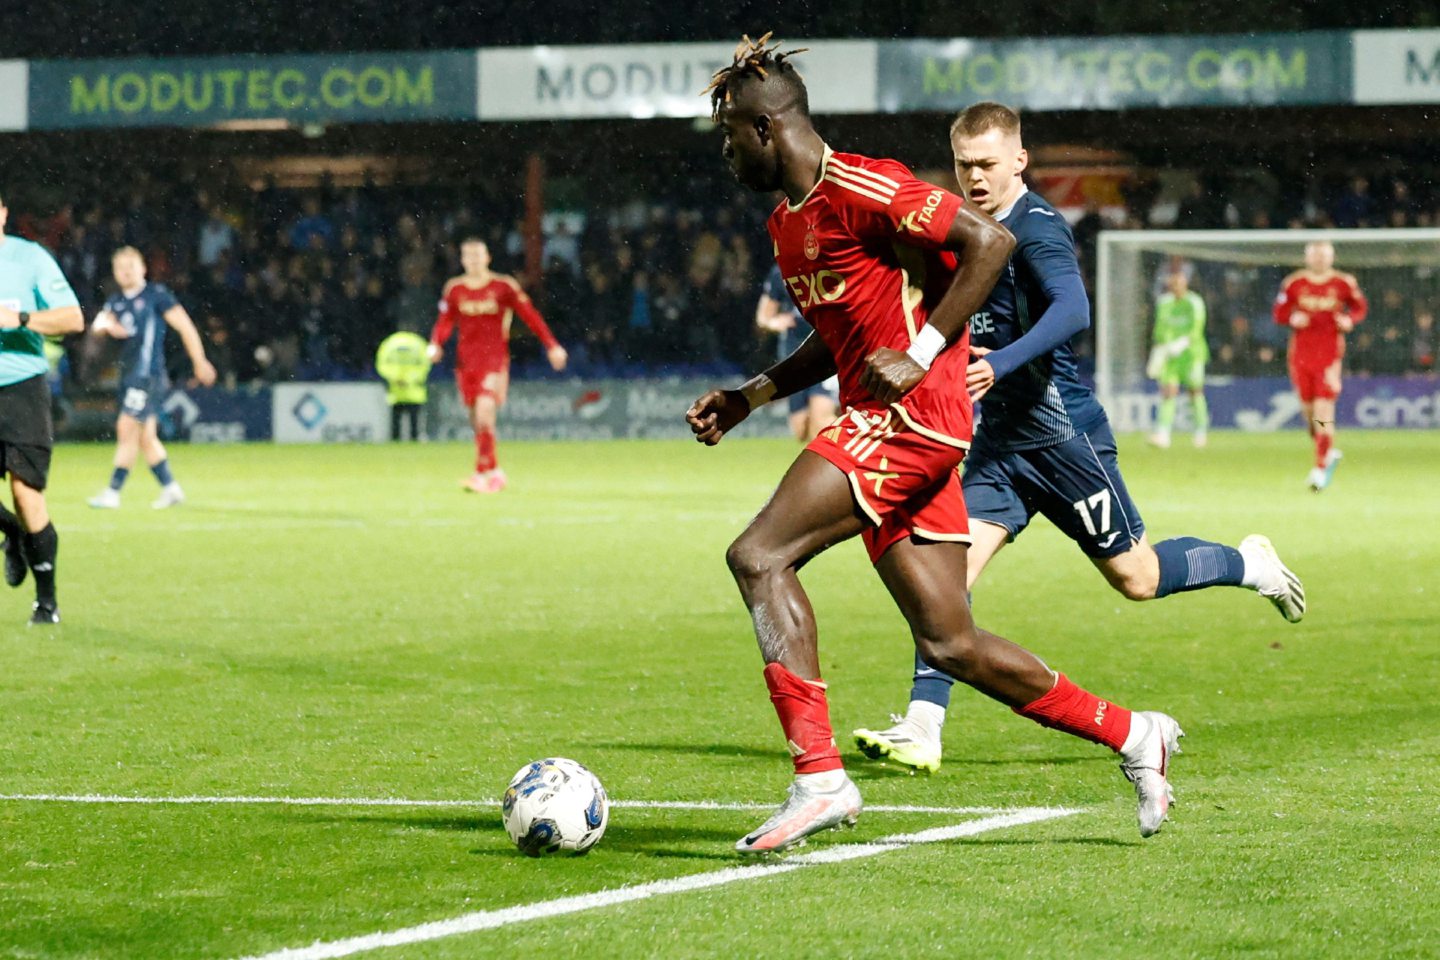 Pape Gueye in action in the Viaplay Cup tie defeat of Ross County. in Dingwall. Image: Shutterstock